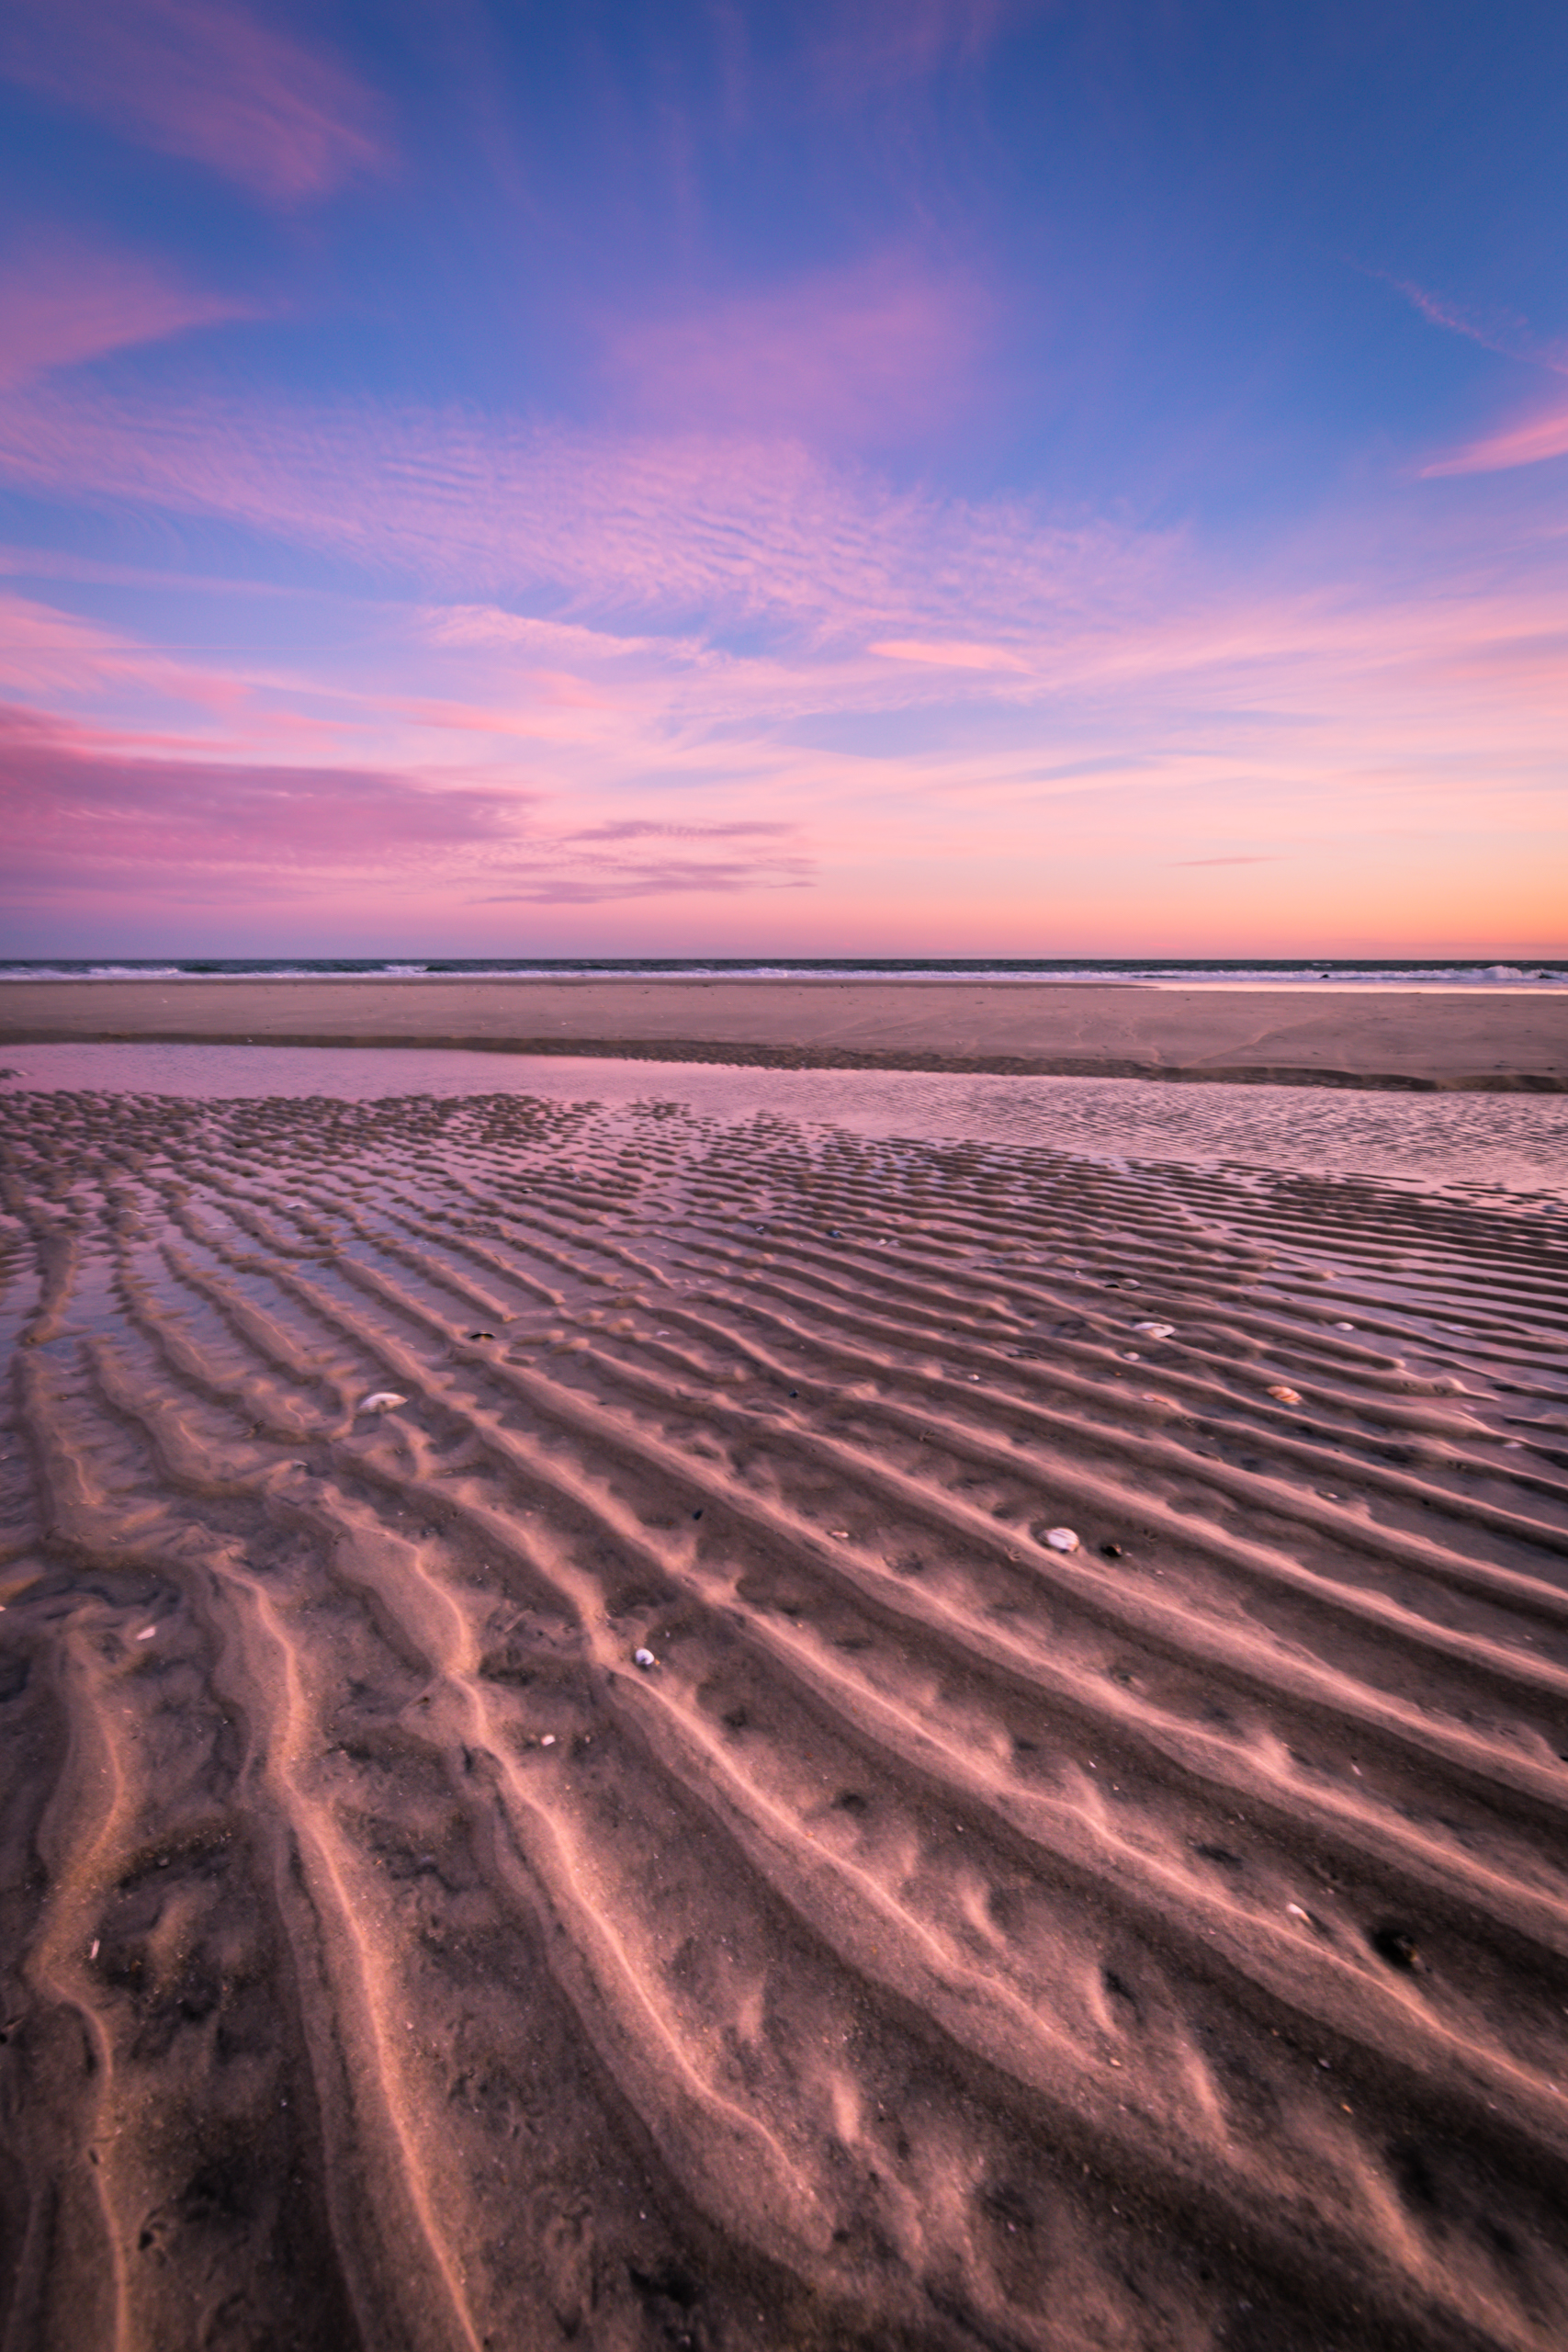 Vertical orientation photograph with strong leading lines in the sand underneath a pastel sunset